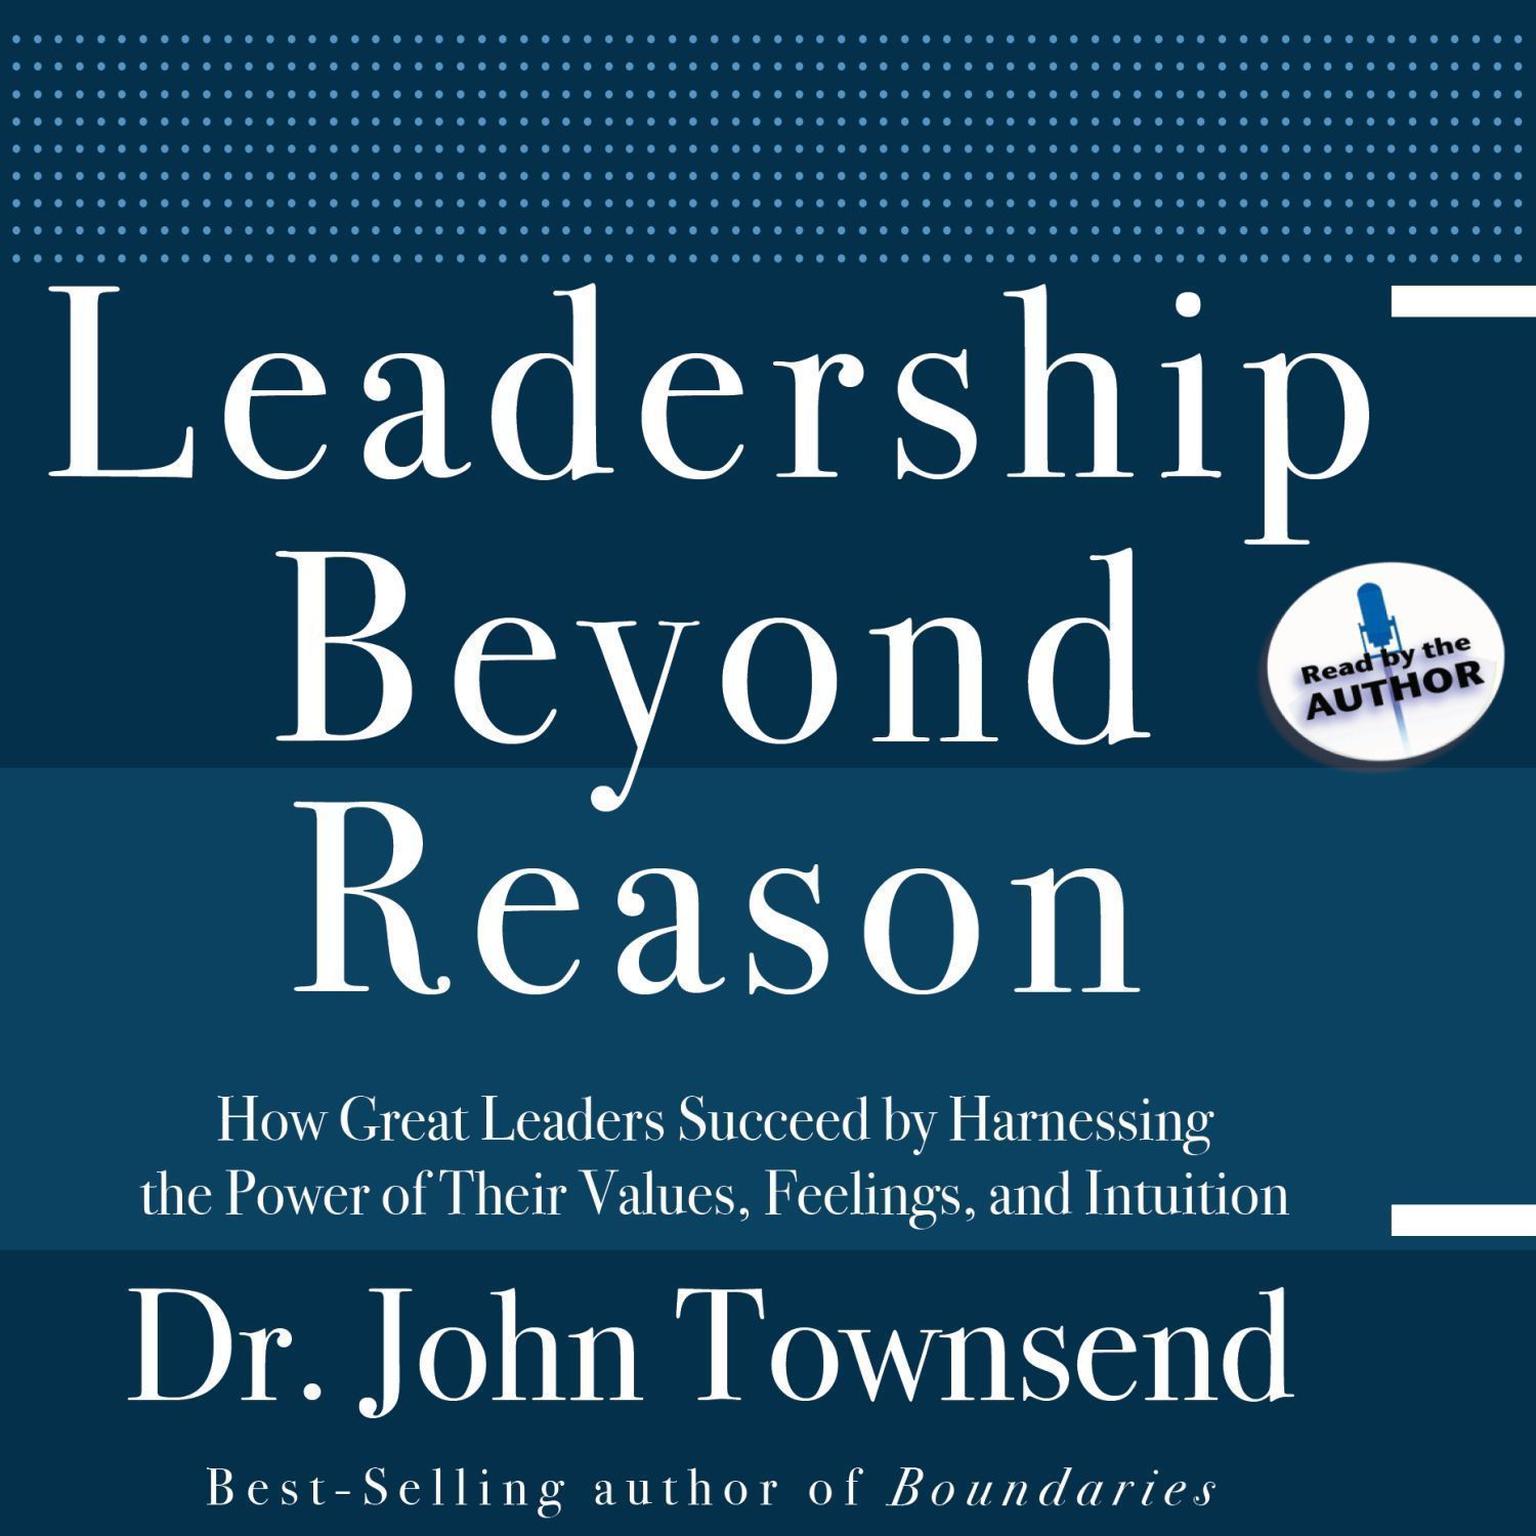 Leadership Beyond Reason: How Great Leaders Succeed by Harnessing the Power of Their Values, Feelings, and Intuition Audiobook, by John Townsend